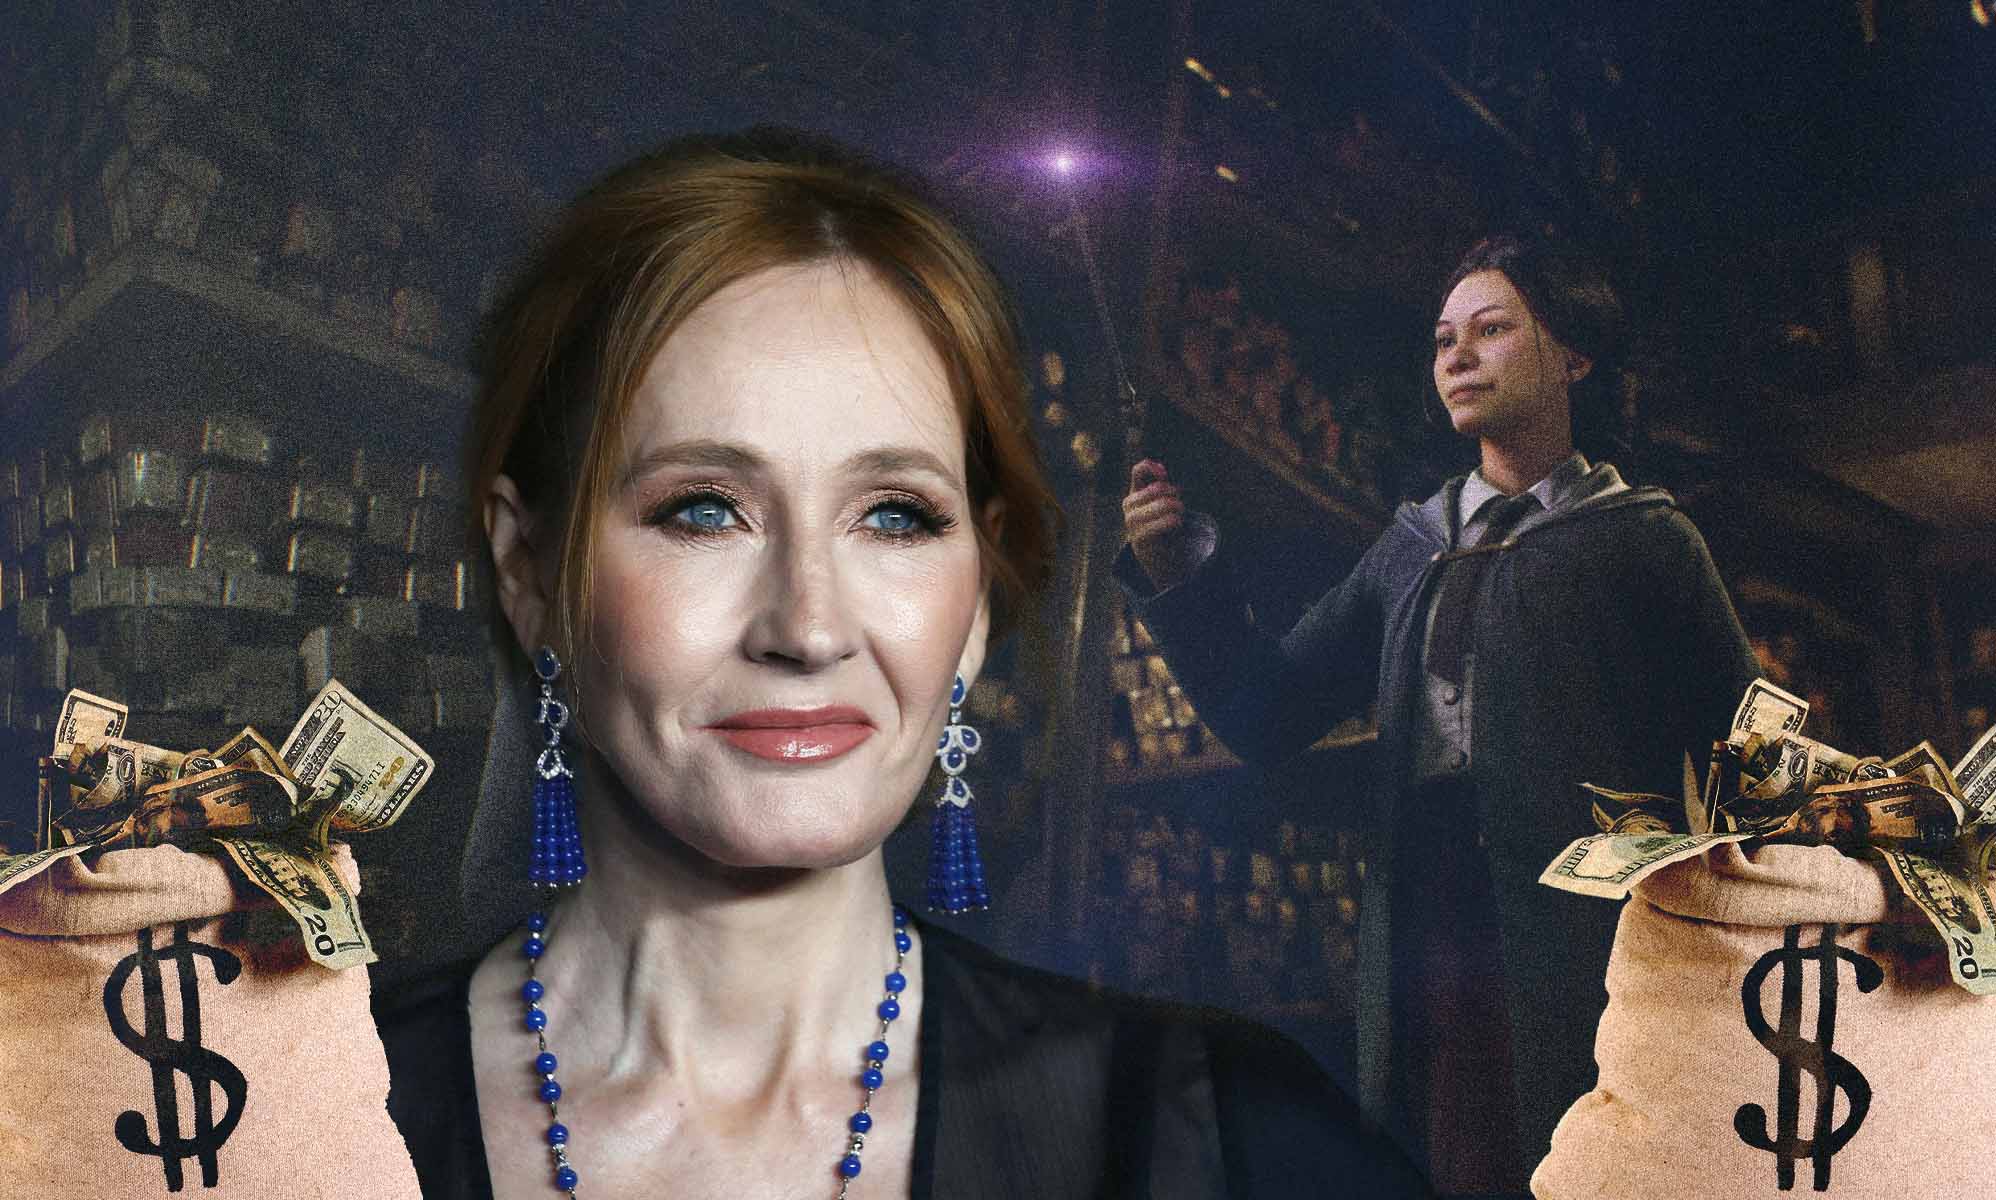 The new Harry Potter game is a hit. Here's why some trans gamers